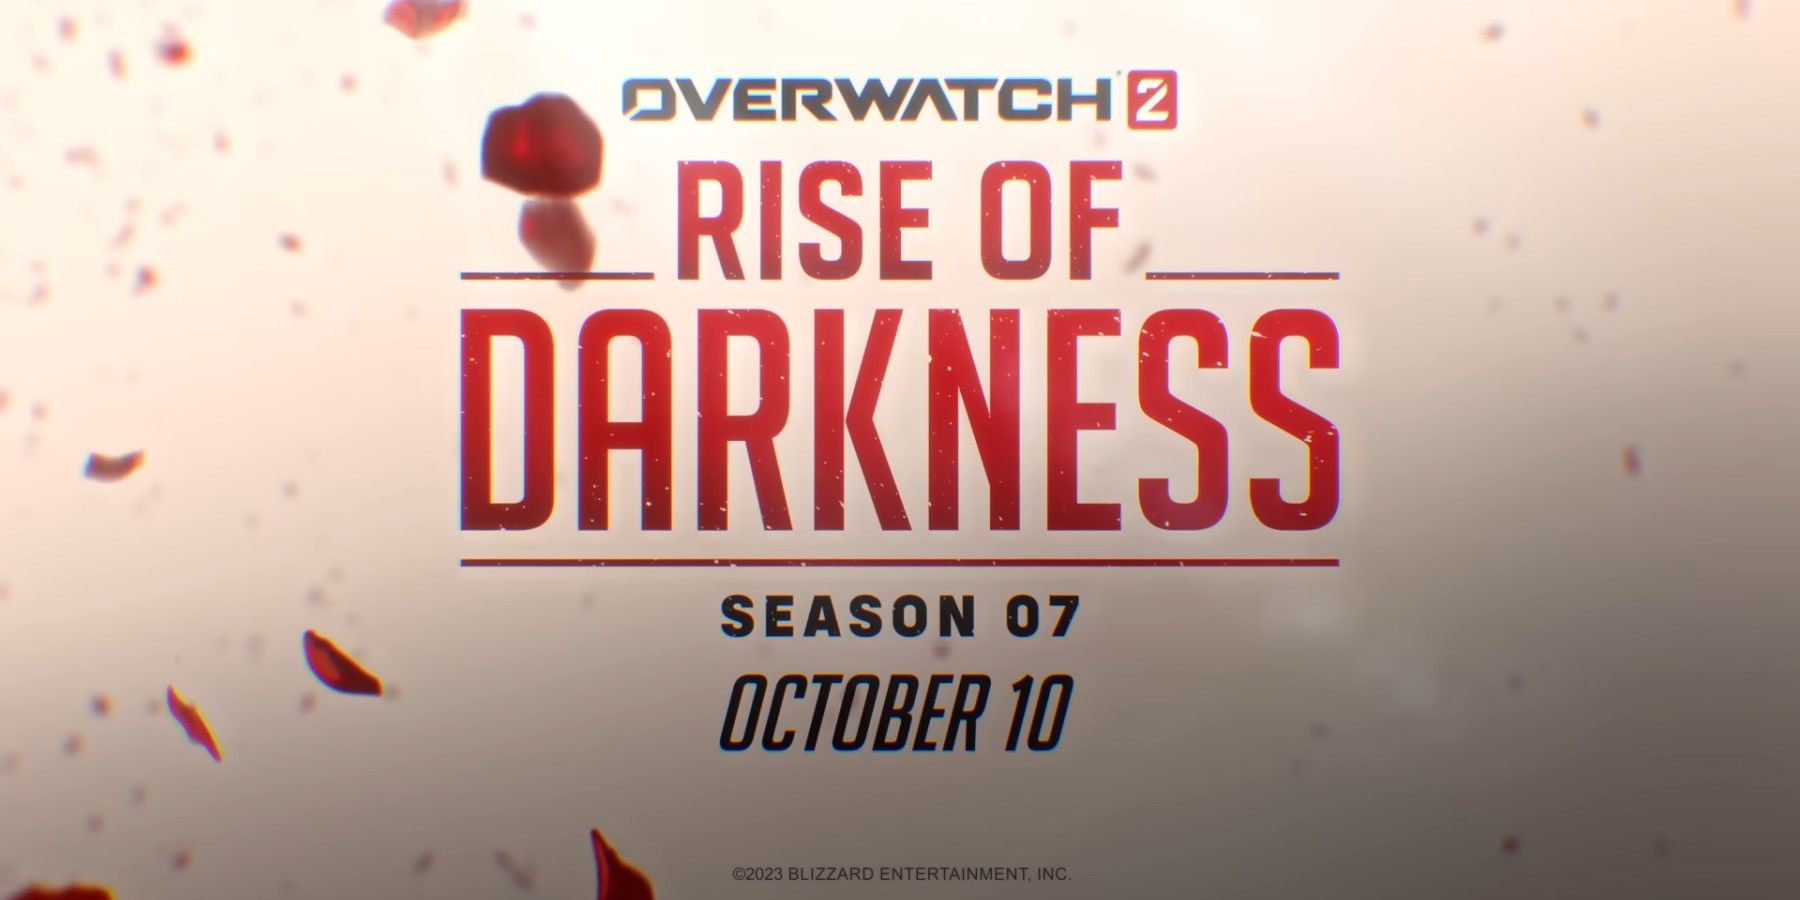 ow2 rise of darkness skins